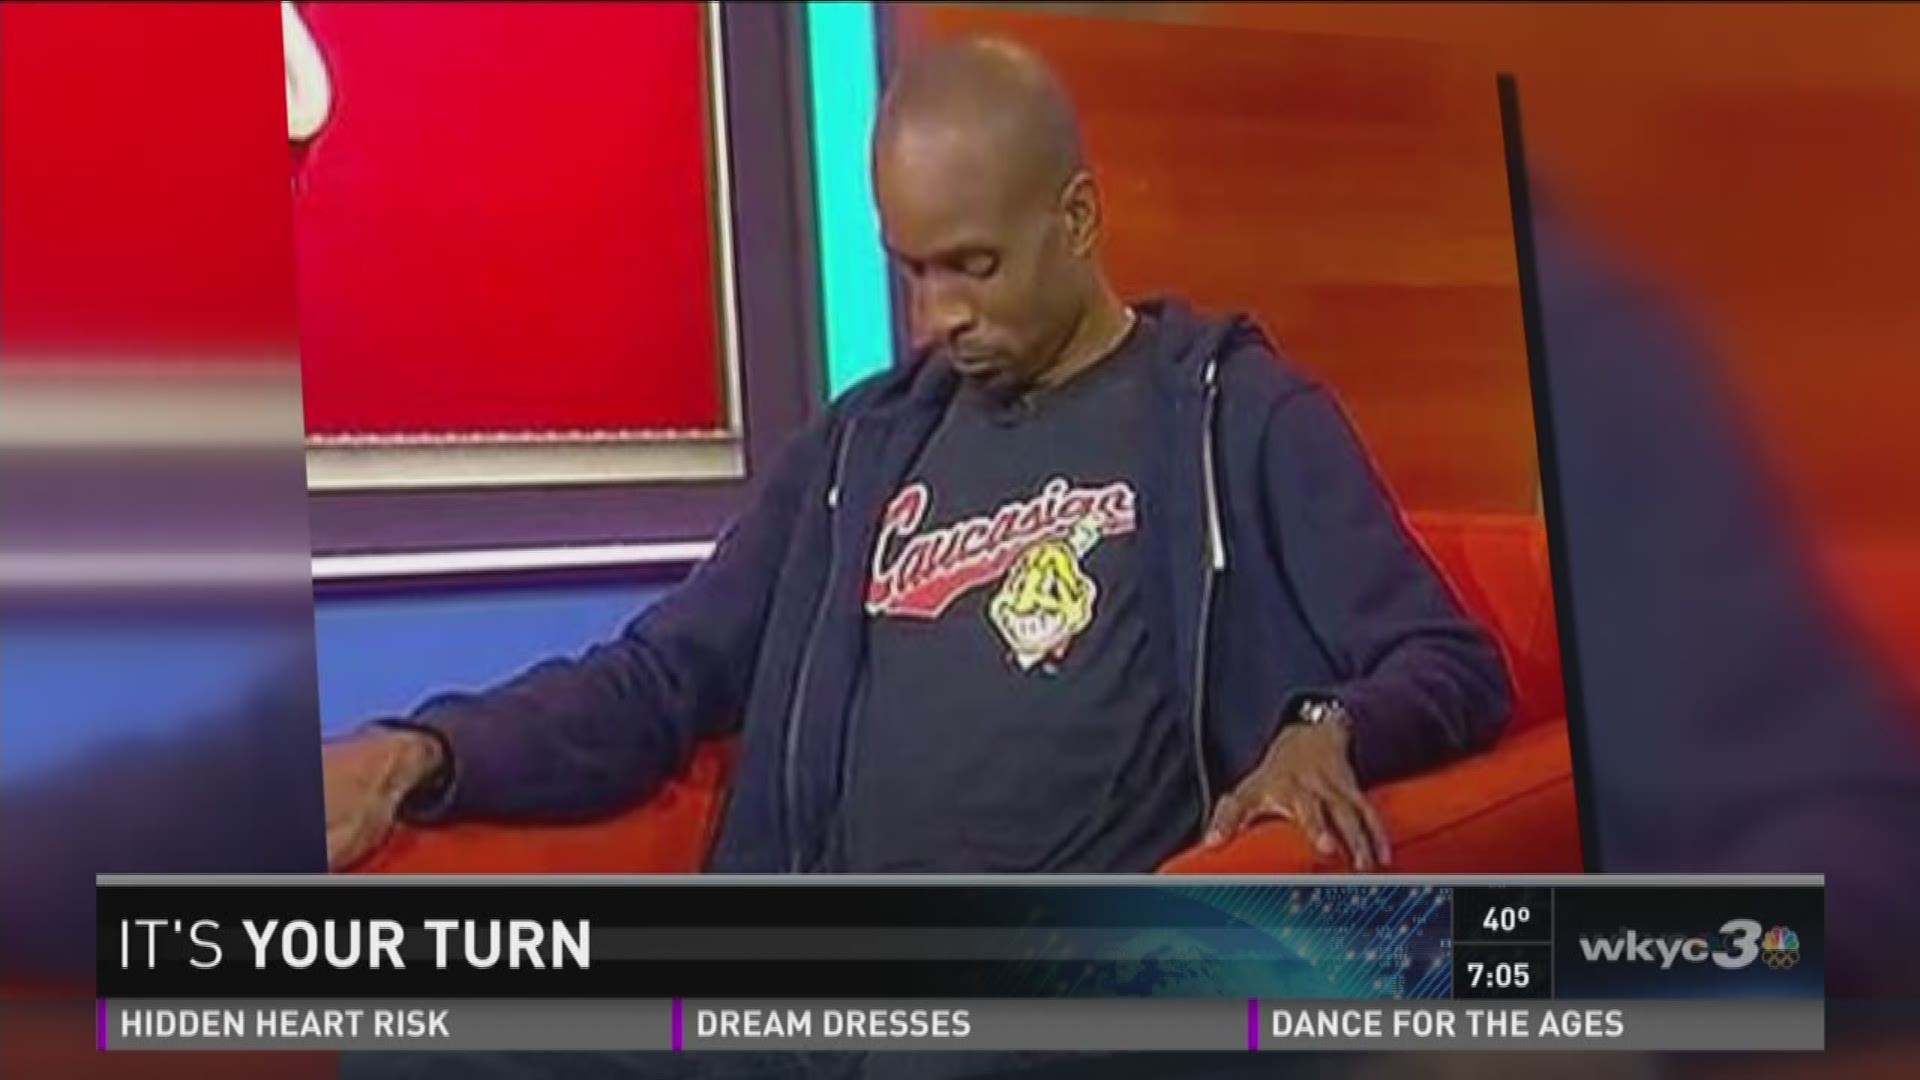 Bomani Jones explains why he wore 'Caucasians' shirt on Mike and Mike